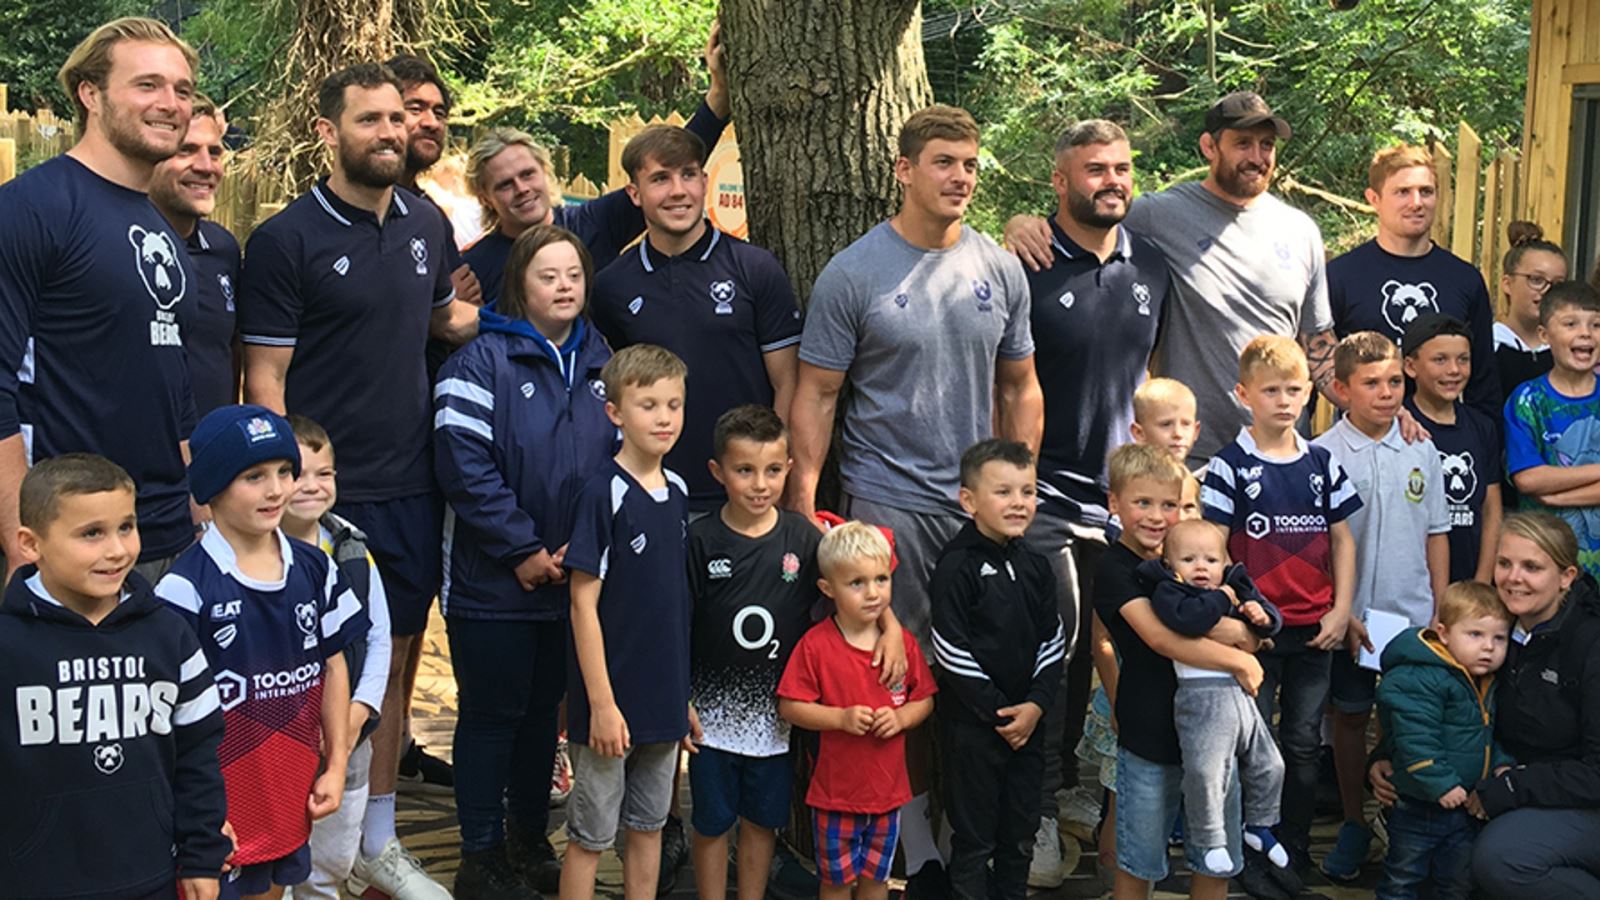 Bristol Bears and their fans at Wild Place Project in 2019